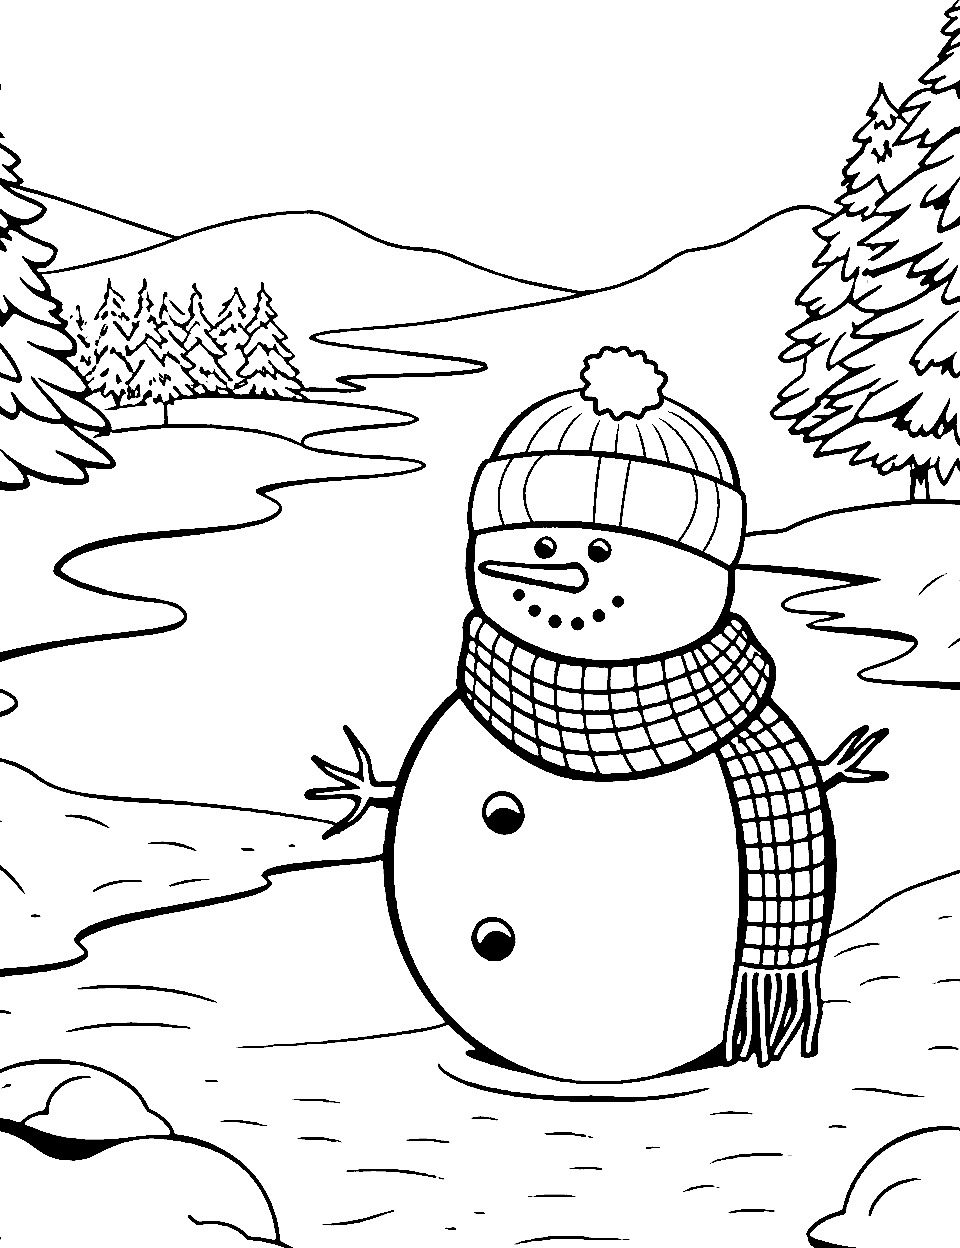 Frozen Lake with Snowman Coloring Page - A snowman standing by a frozen lake.